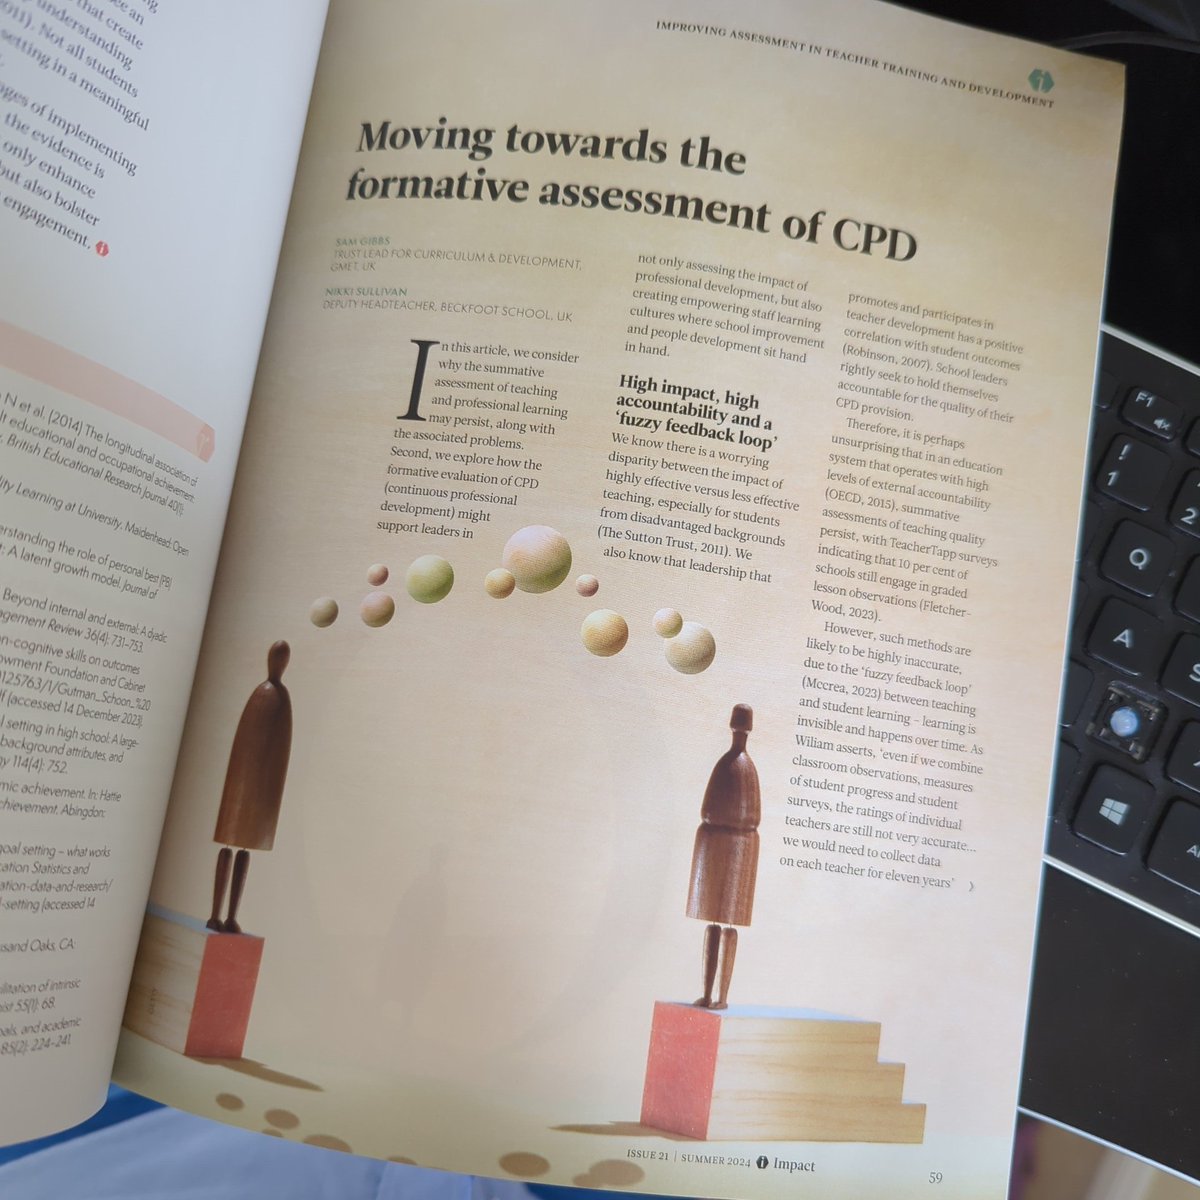 Never would have imagined 12 months ago that I'd have written two articles for Impact. Huge thank you to @MrsSmith_SEND and now @Sam_LGibbs for being the best co-authors! For anyone considering it, I highly recommend just giving it a go! The @CharteredColl team are so helpful.